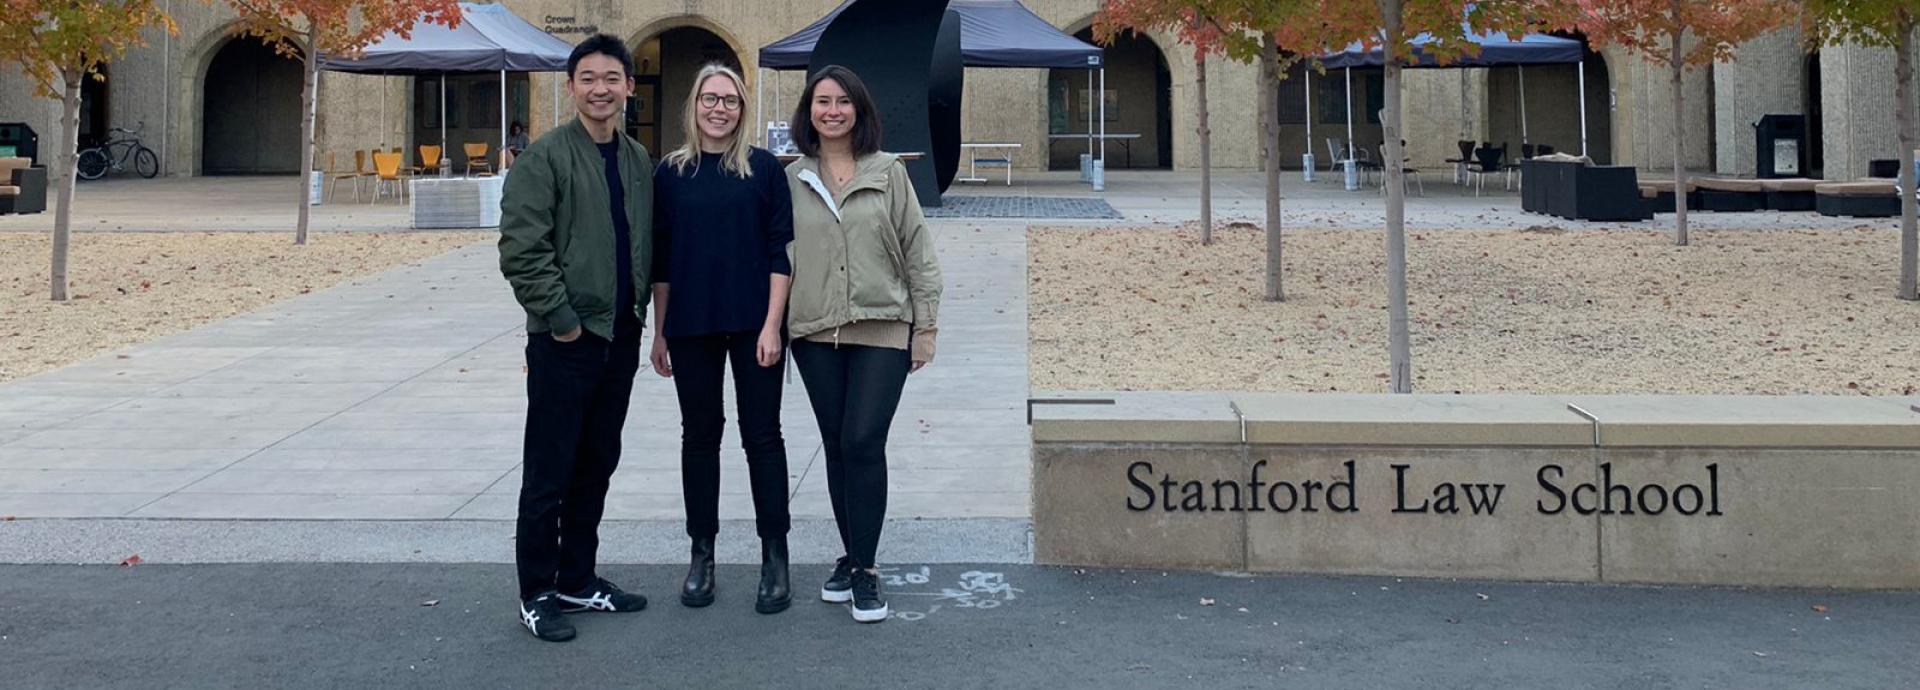 Sonja Heiskala with Kohei Wachi and Dilsad Saglam in front of Stanford Law School campus on a fall day